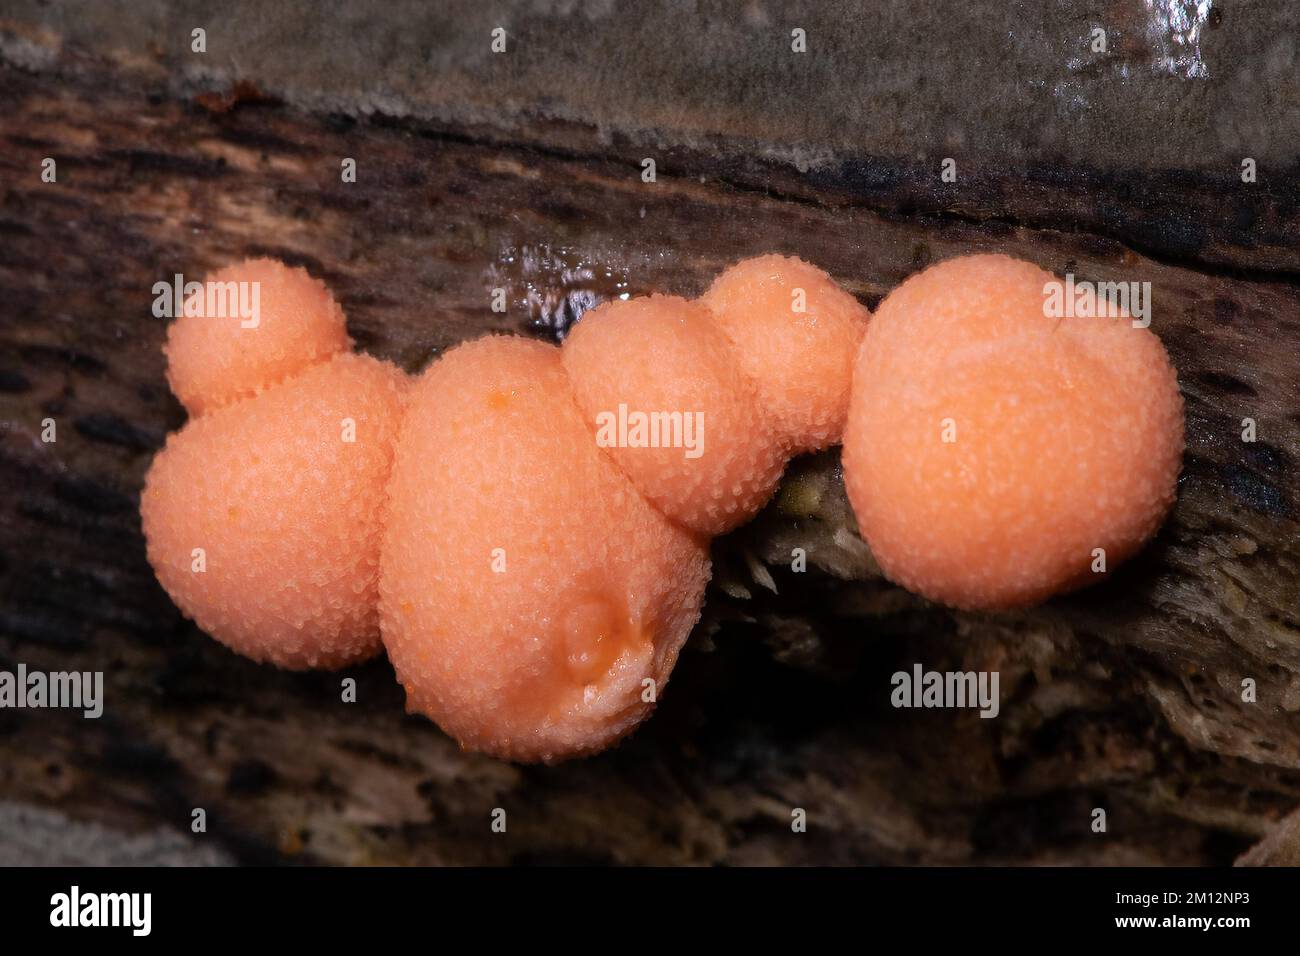 Blood milk mushroom six salmon red fruiting bodies next to each other on tree trunk Stock Photo